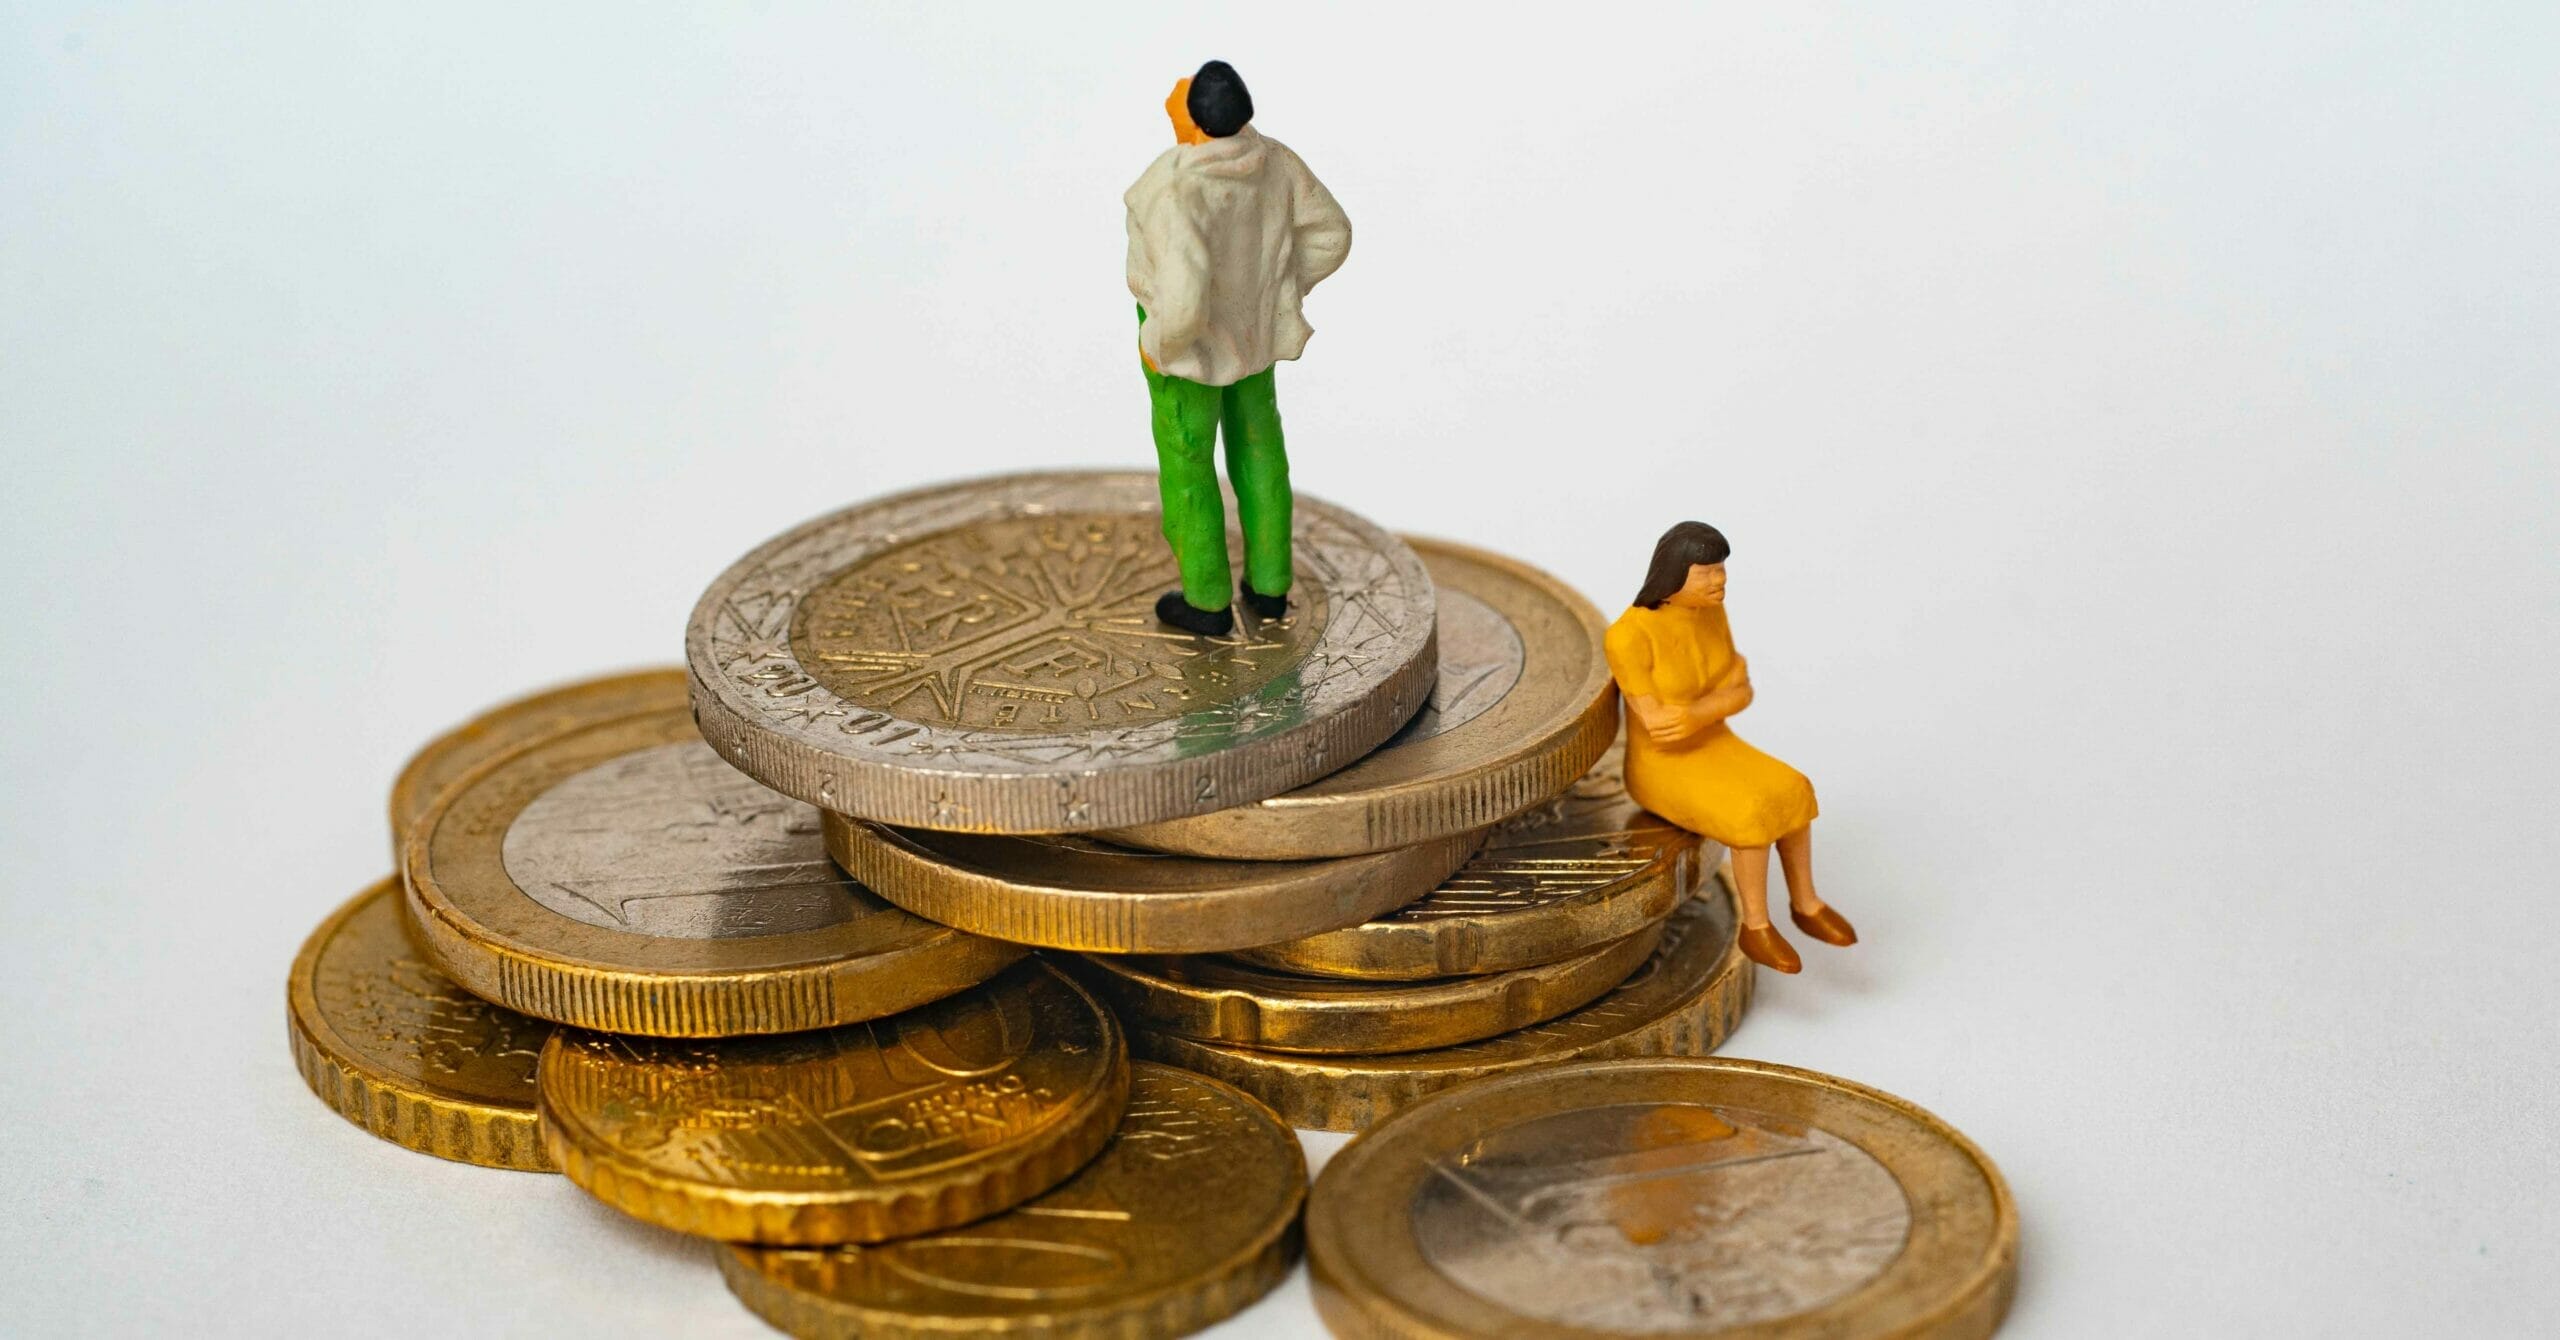 Man and woman sitting on unequal levels of coins